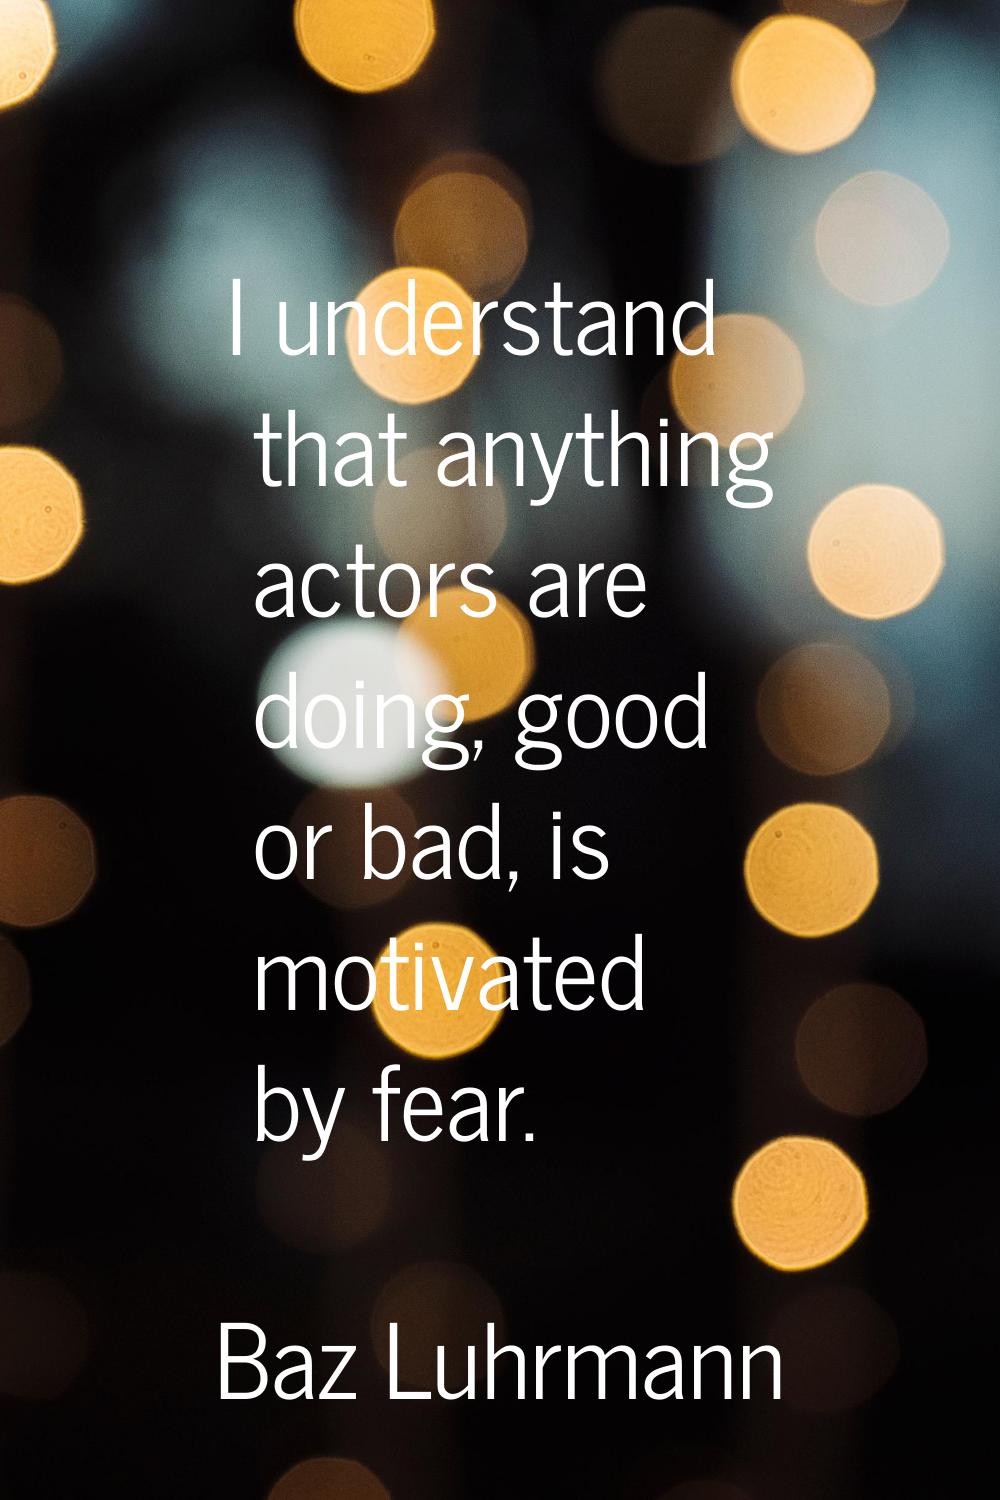 I understand that anything actors are doing, good or bad, is motivated by fear.